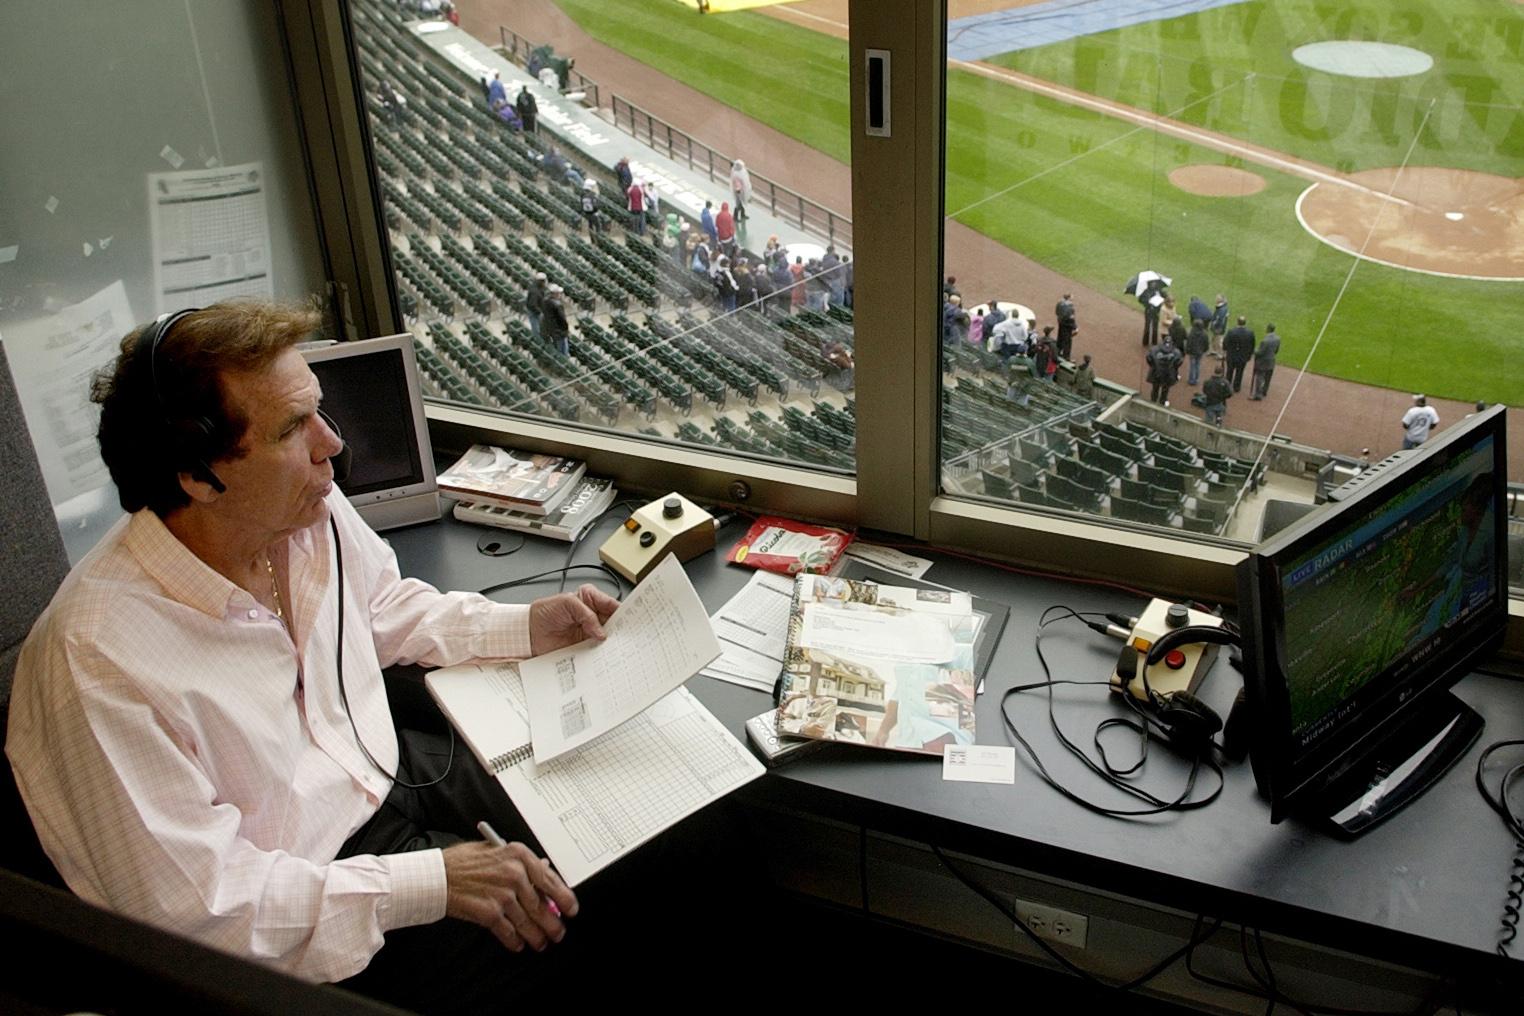 Ed Farmer, White Sox Broadcaster, Former Pitcher, Dies at 70 In this April 28, 2008, photo, radio broadcaster Ed Farmer is shown in the broadcast booth before a baseball game between the Baltimore Orioles and Chicago White Sox in Chicago. (Rich Hein / Chicago Sun-Times via AP, File)